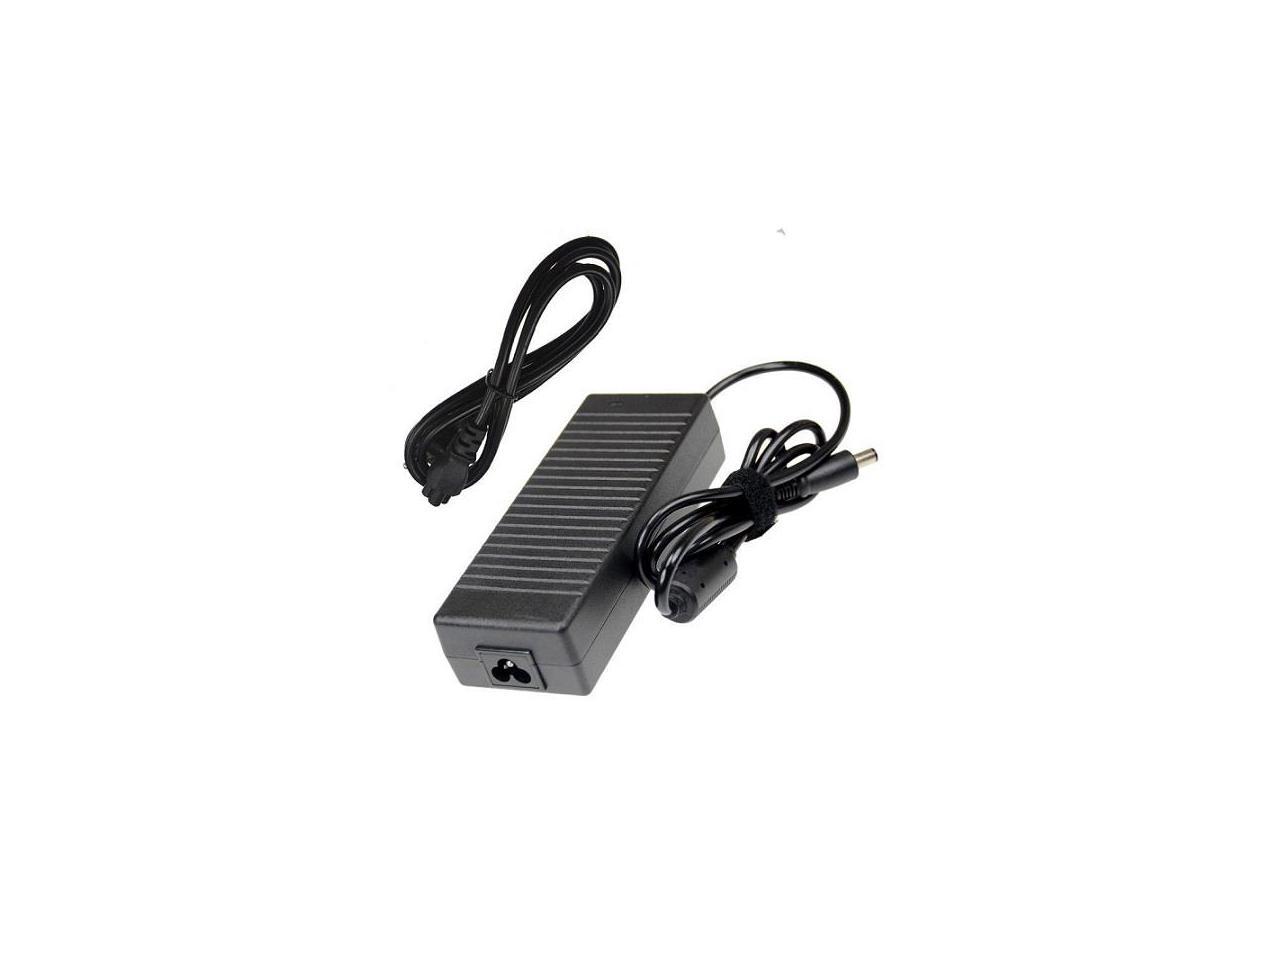 HP 200-5020 All-in-One desktop AIO PC power supply ac adapter cord cable charger